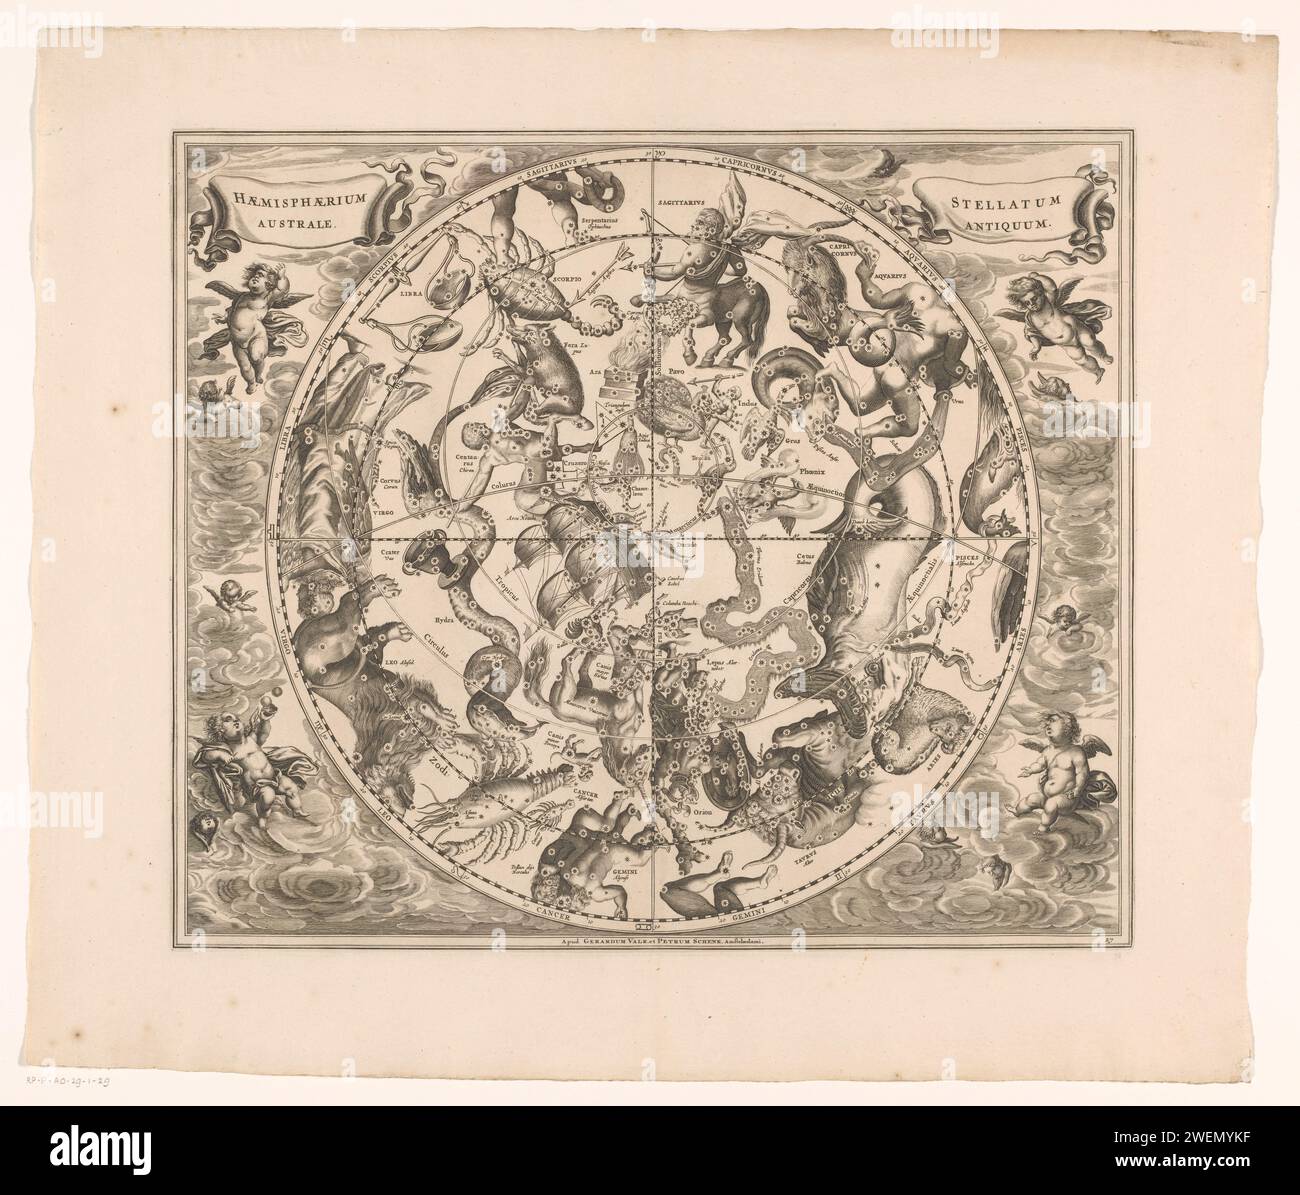 Hemelaart with the southern constellations, Anonymous, 1708 print Hemelaart with the southern constellations, according to the traditional layout of Ptolemyus and his followers. The classic constellation Argo Navis is displayed as the East Indies. Left and top right the title cartouches. Numbered in the bottom right: 27.  paper engraving zodiac; the twelve zodiacal signs together. star-chart, star map Stock Photo